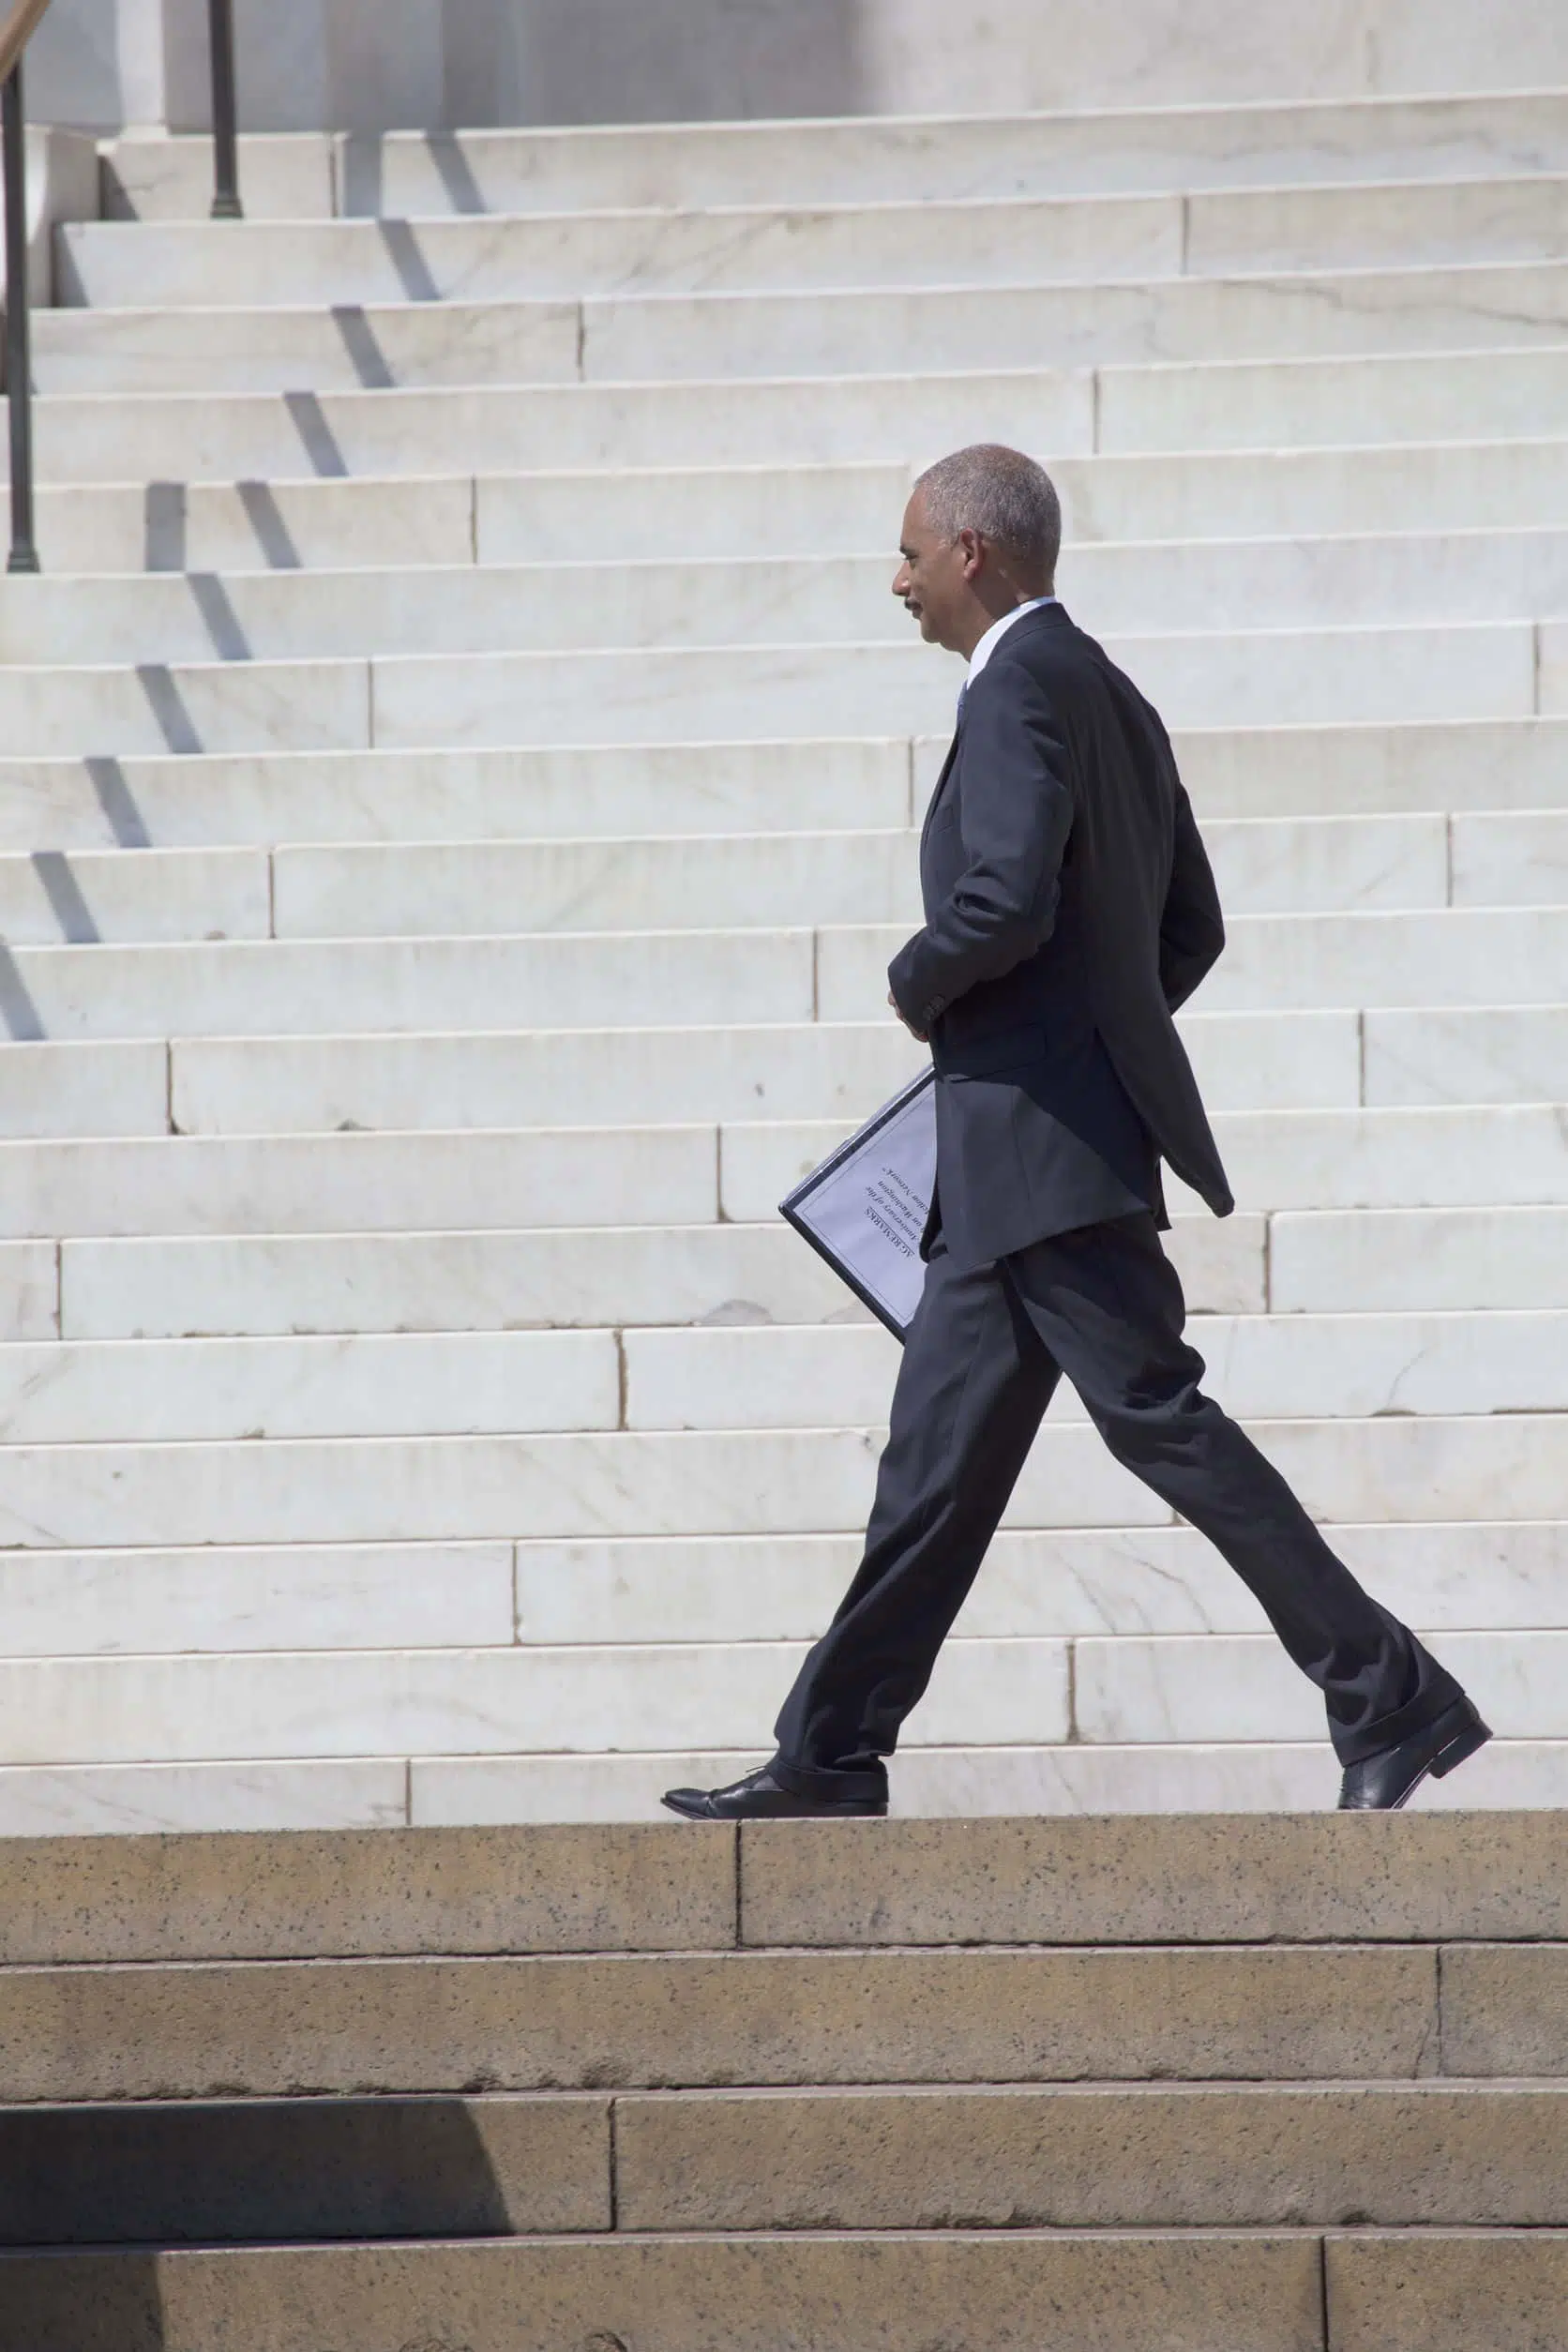 Eric Holder walking like a former attorney general boss